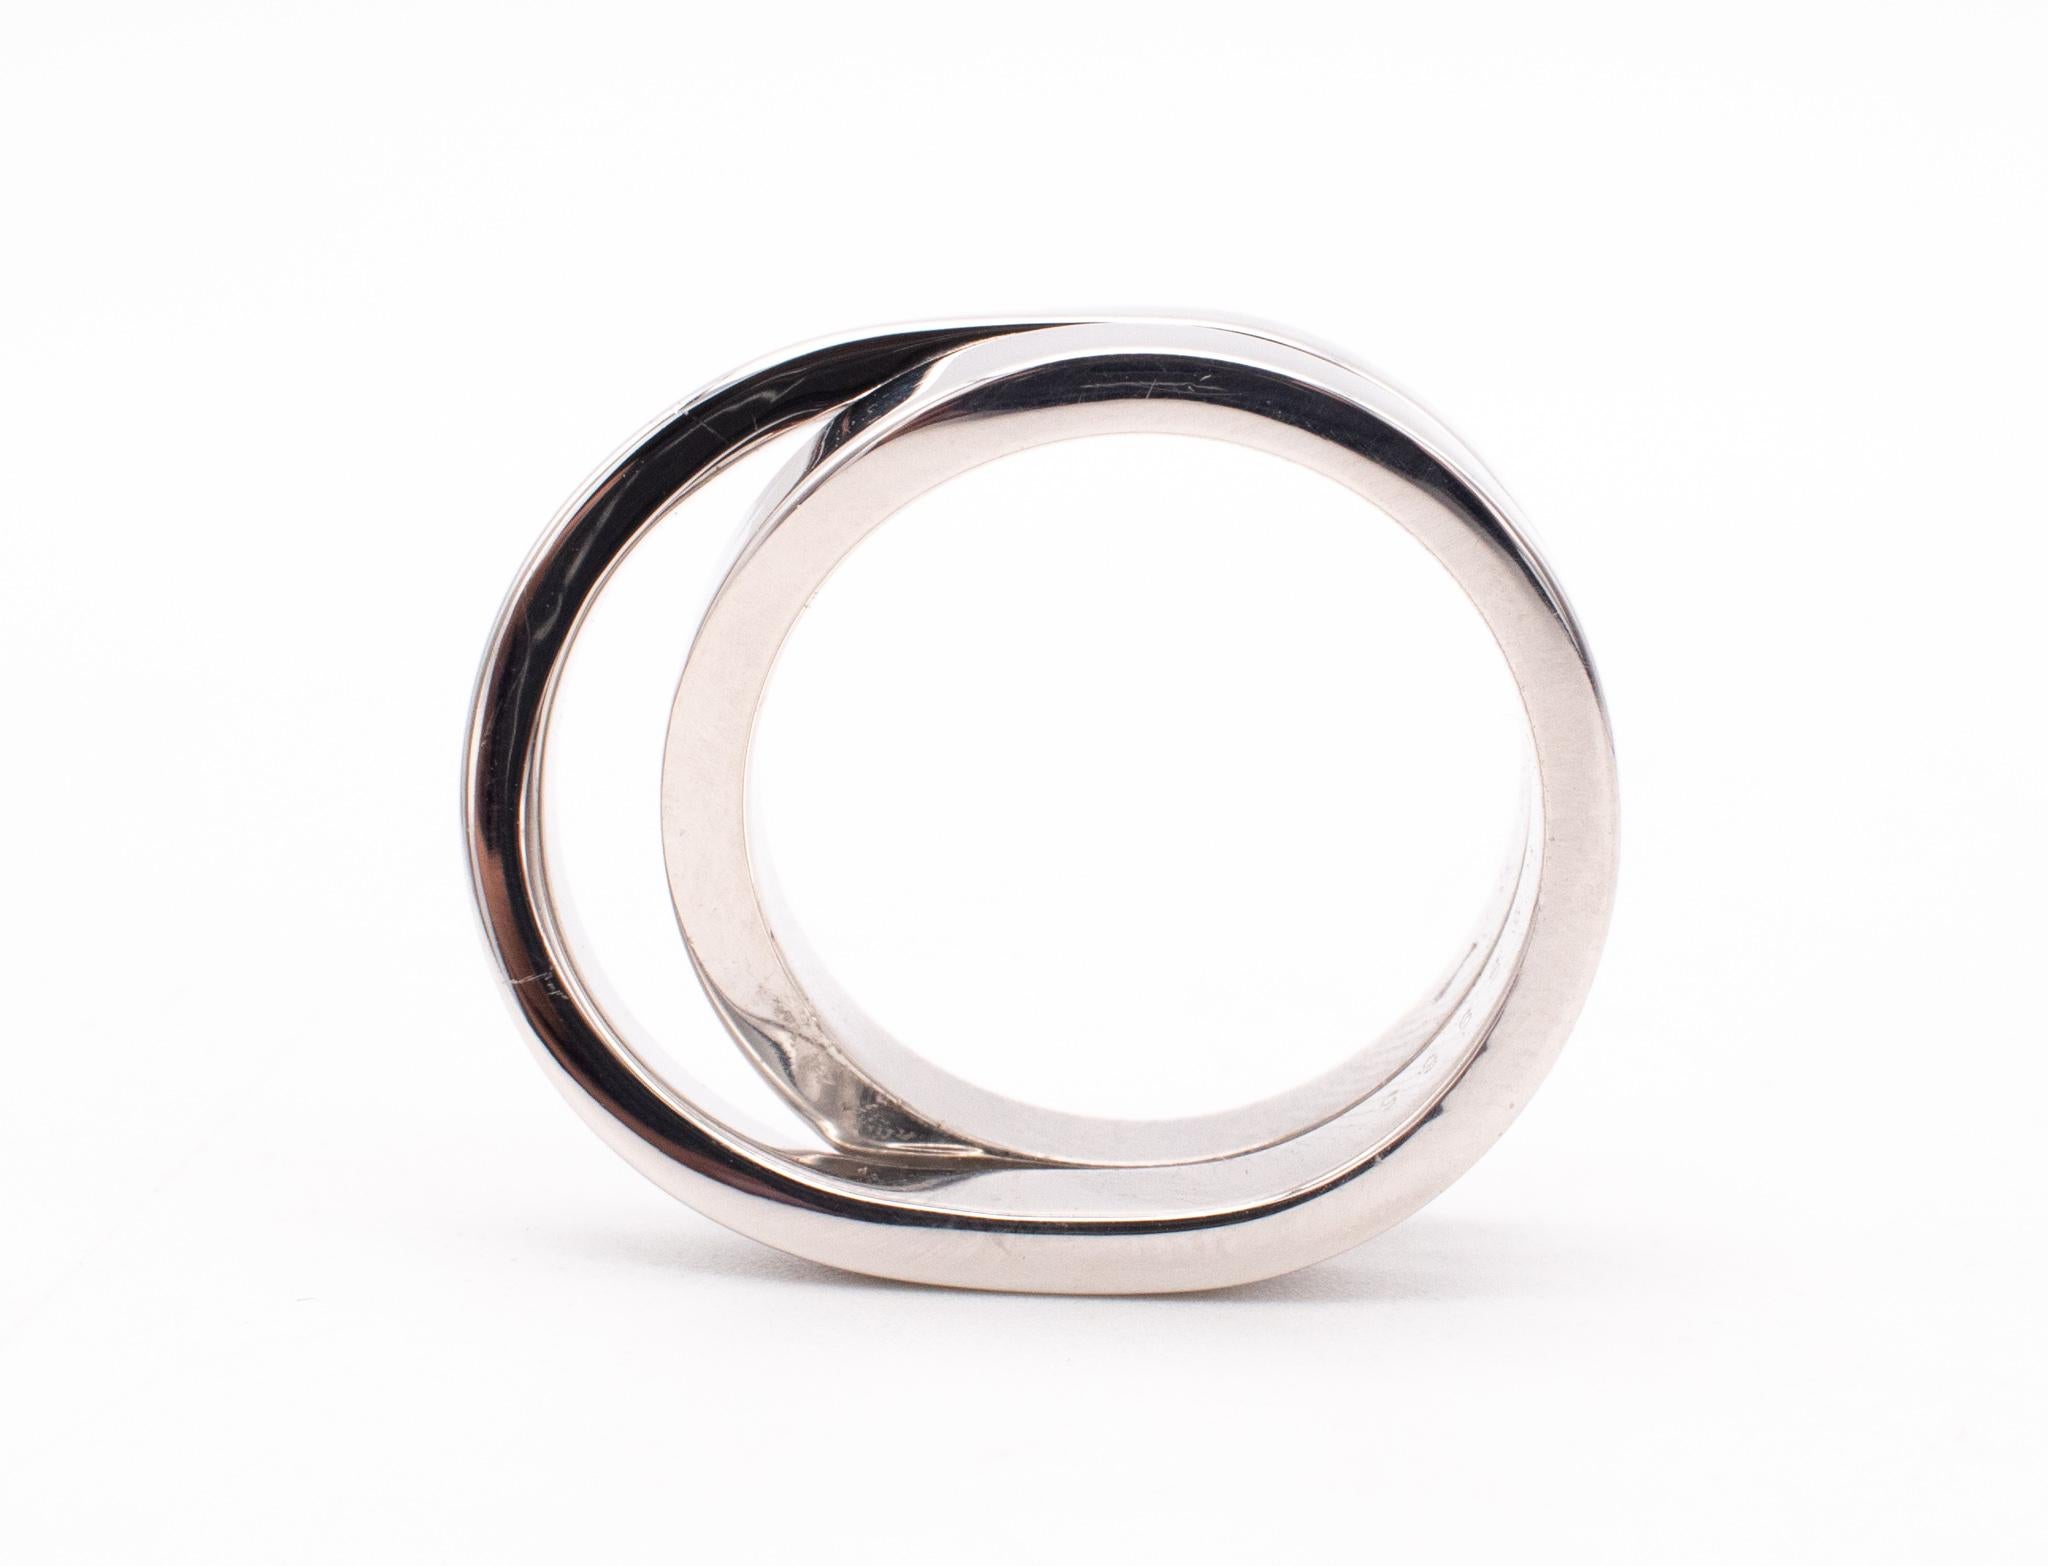 Cartier Paris Modern Nouvelle Bague Twisted Ring in Solid 18Kt White Gold In Excellent Condition For Sale In Miami, FL